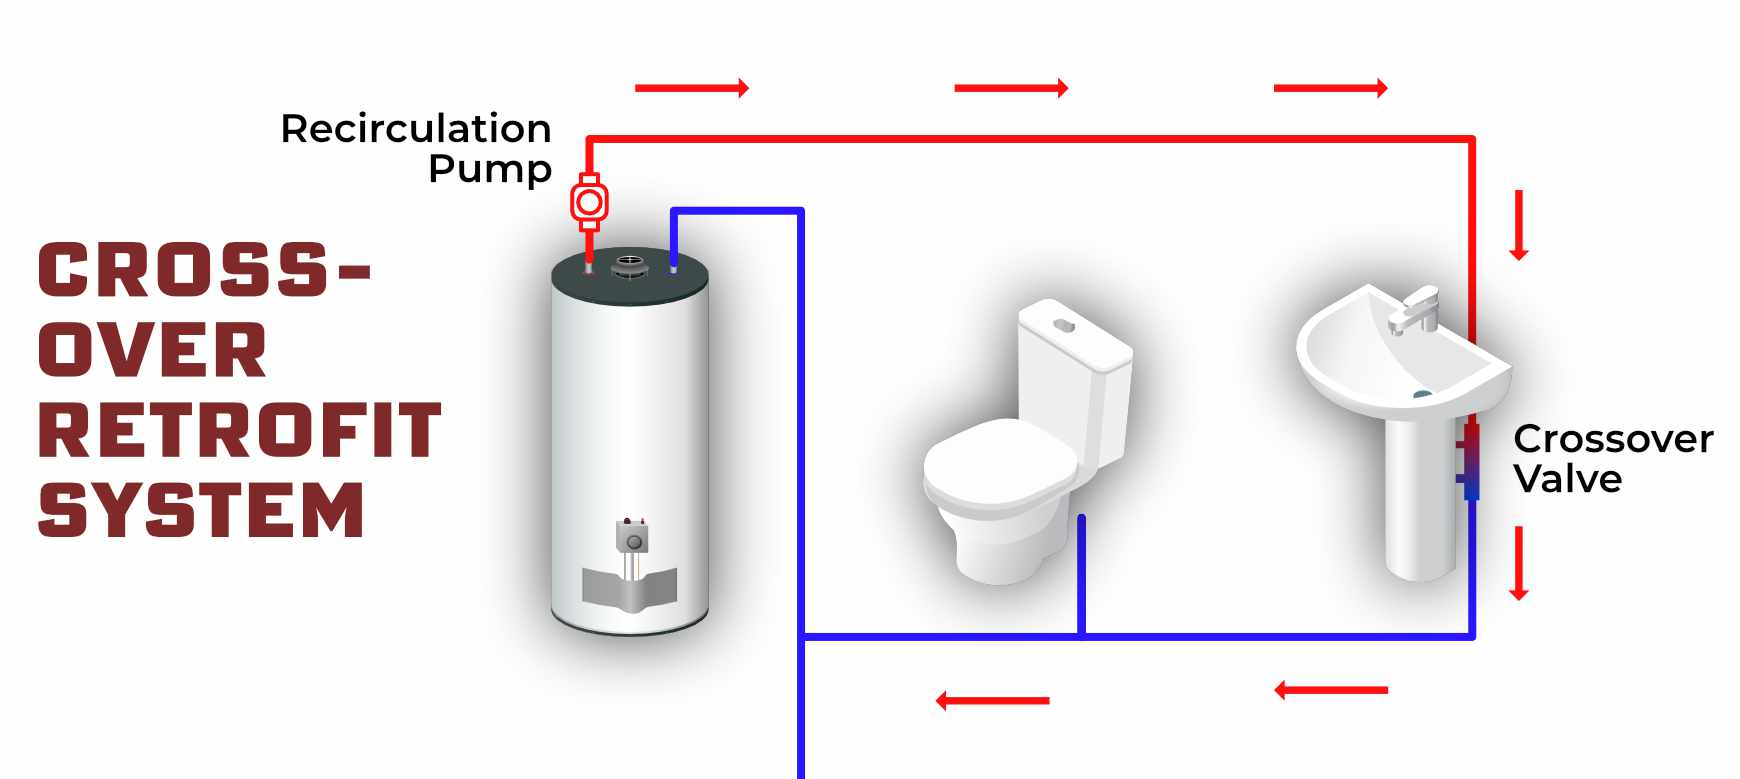 A simplified illustration of a hot water system with retrofit crossover style recirculation pump